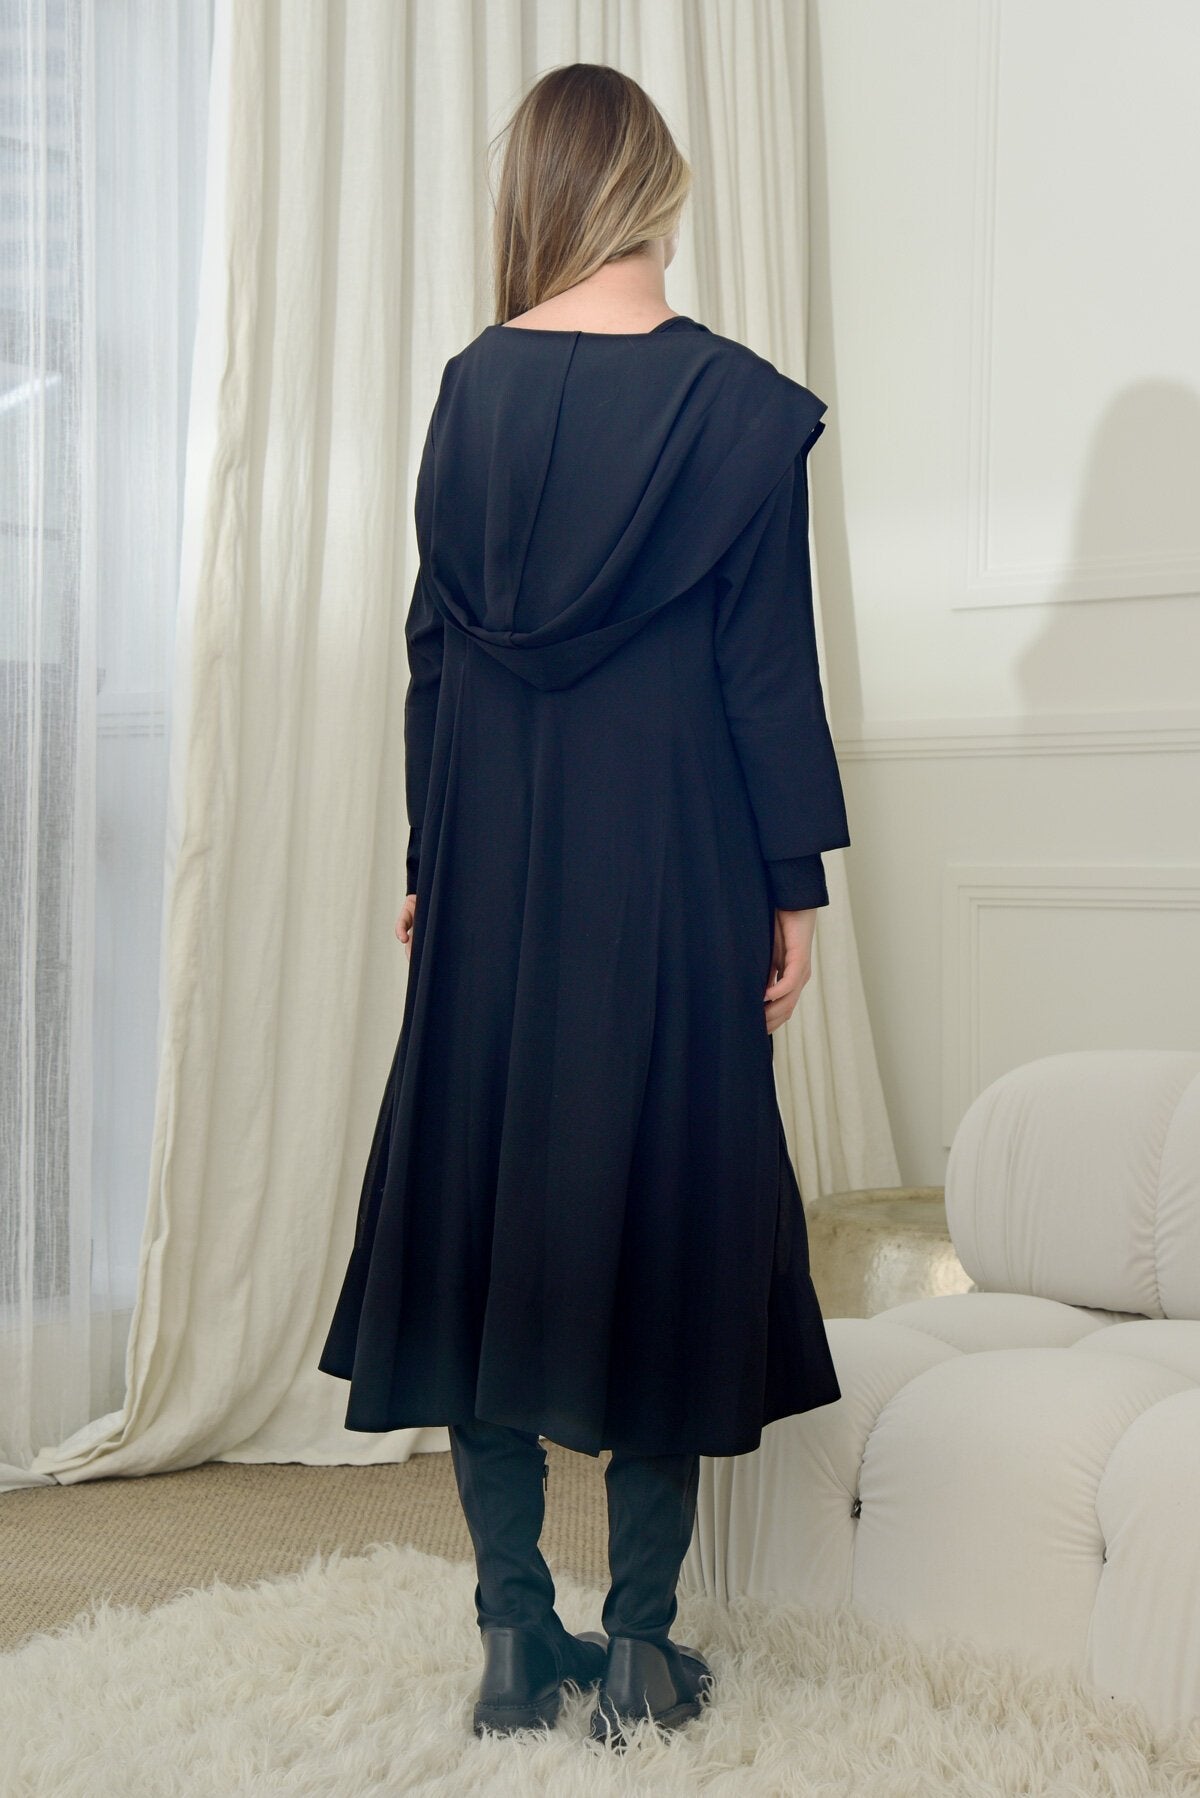 CURATE UNDERCOVER DRESS - BLACK - THE VOGUE STORE